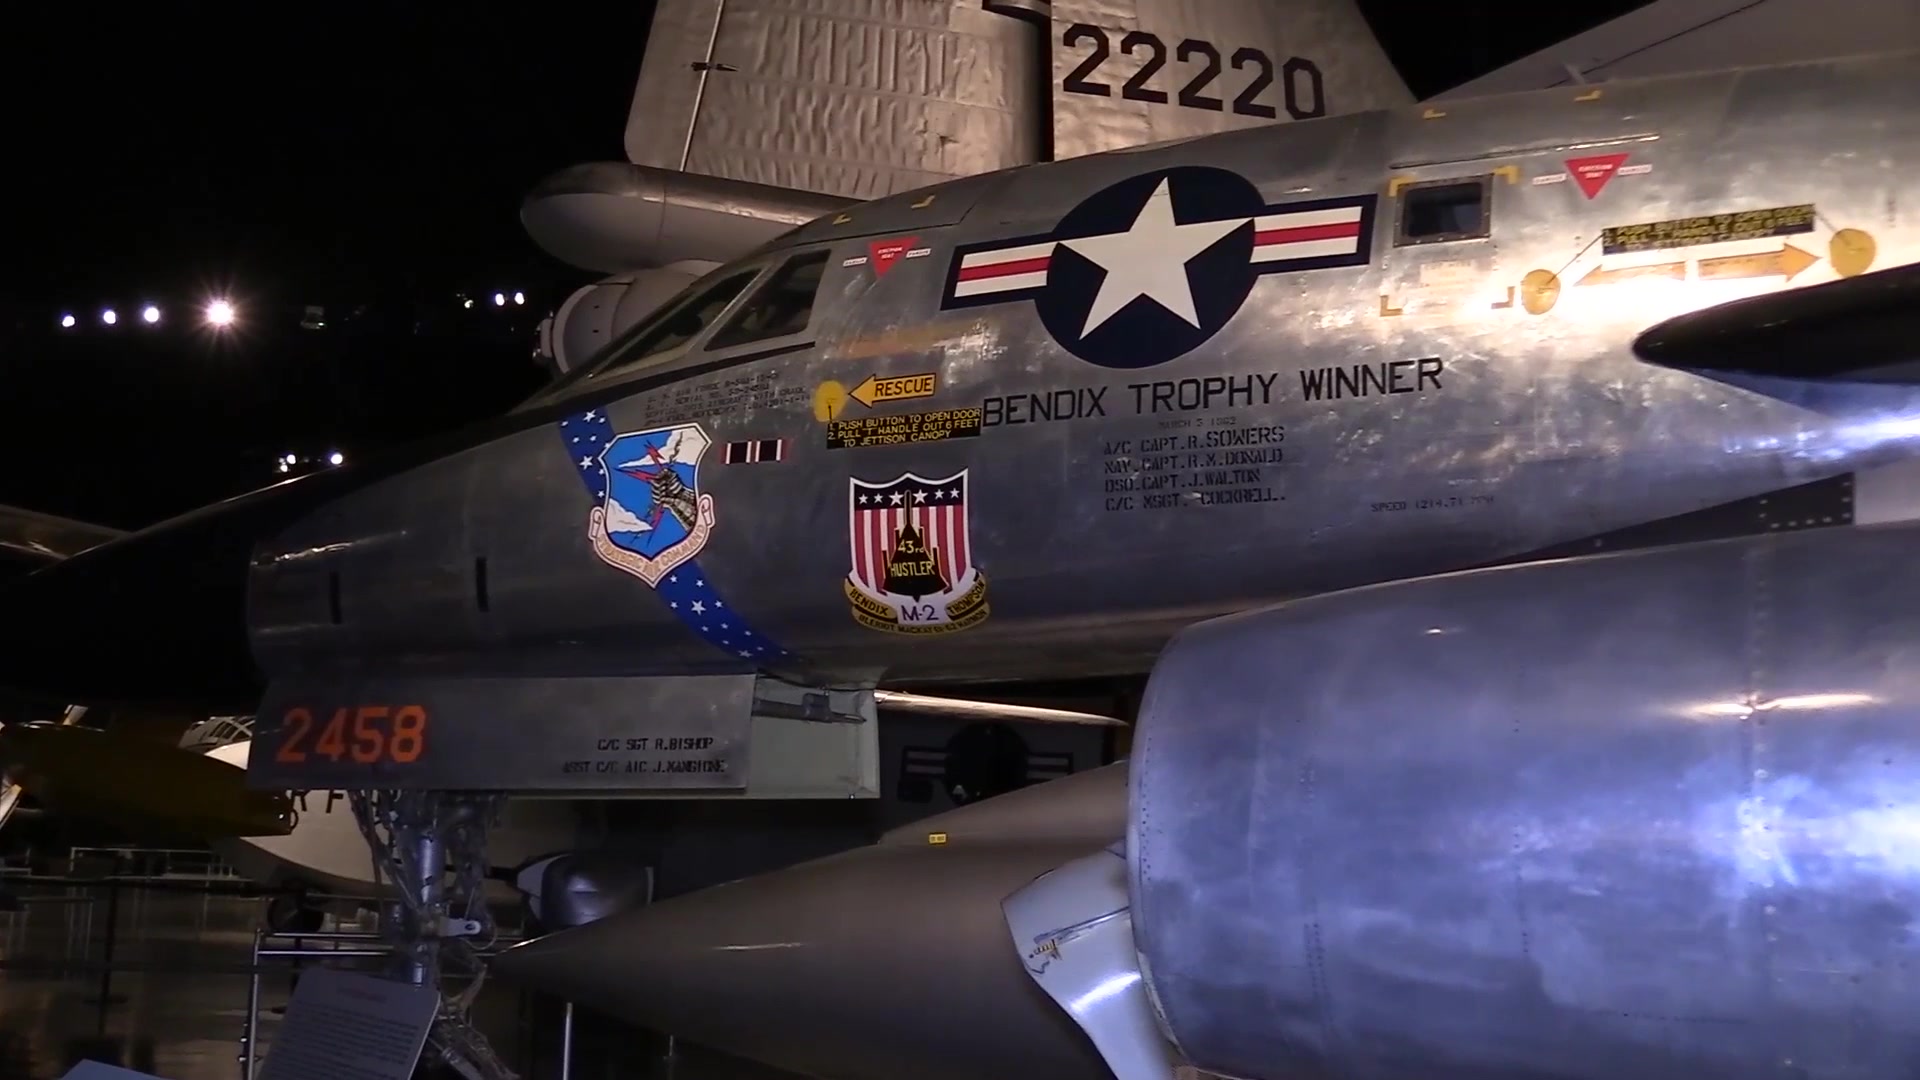 Interview with Col.(Ret.) Chuck Jones as he talks about his time in the Convair B-58A Hustler. Colonel Jones is a former navigator/bombardier in the B-58 and currently volunteers here at the museum. You can see the museum's B-58 in the Cold War Gallery--> http://bit.ly/2ggqWdv

The U.S. Air Force's first operational supersonic bomber, the B-58 made its initial flight on Nov. 11, 1956. In addition to the Hustler's delta wing shape, distinctive features included a sophisticated inertial guidance navigation and bombing system, a slender "wasp-waist" fuselage and an extensive use of heat-resistant honeycomb sandwich skin panels in the wings and fuselage. Since the thin fuselage prevented the carrying of bombs internally, a droppable, two-component pod beneath the fuselage contained a nuclear weapon -- along with extra fuel, reconnaissance equipment or other specialized gear. The B-58 crew consisted of a pilot, navigator/bombardier and defense systems operator. 

Convair built 116 B-58s: 30 test and pre-production aircraft and 86 for operational service. Hustlers flew in the Strategic Air Command between 1960 and 1970. Setting 19 world speed and altitude records, B-58s also won five different aviation trophies.

The B-58A on display set three speed records while flying from Los Angeles to New York and back on March 5, 1962. For this effort, the crew received the Bendix and Mackay Trophies for 1962. It was flown to the museum in December 1969.